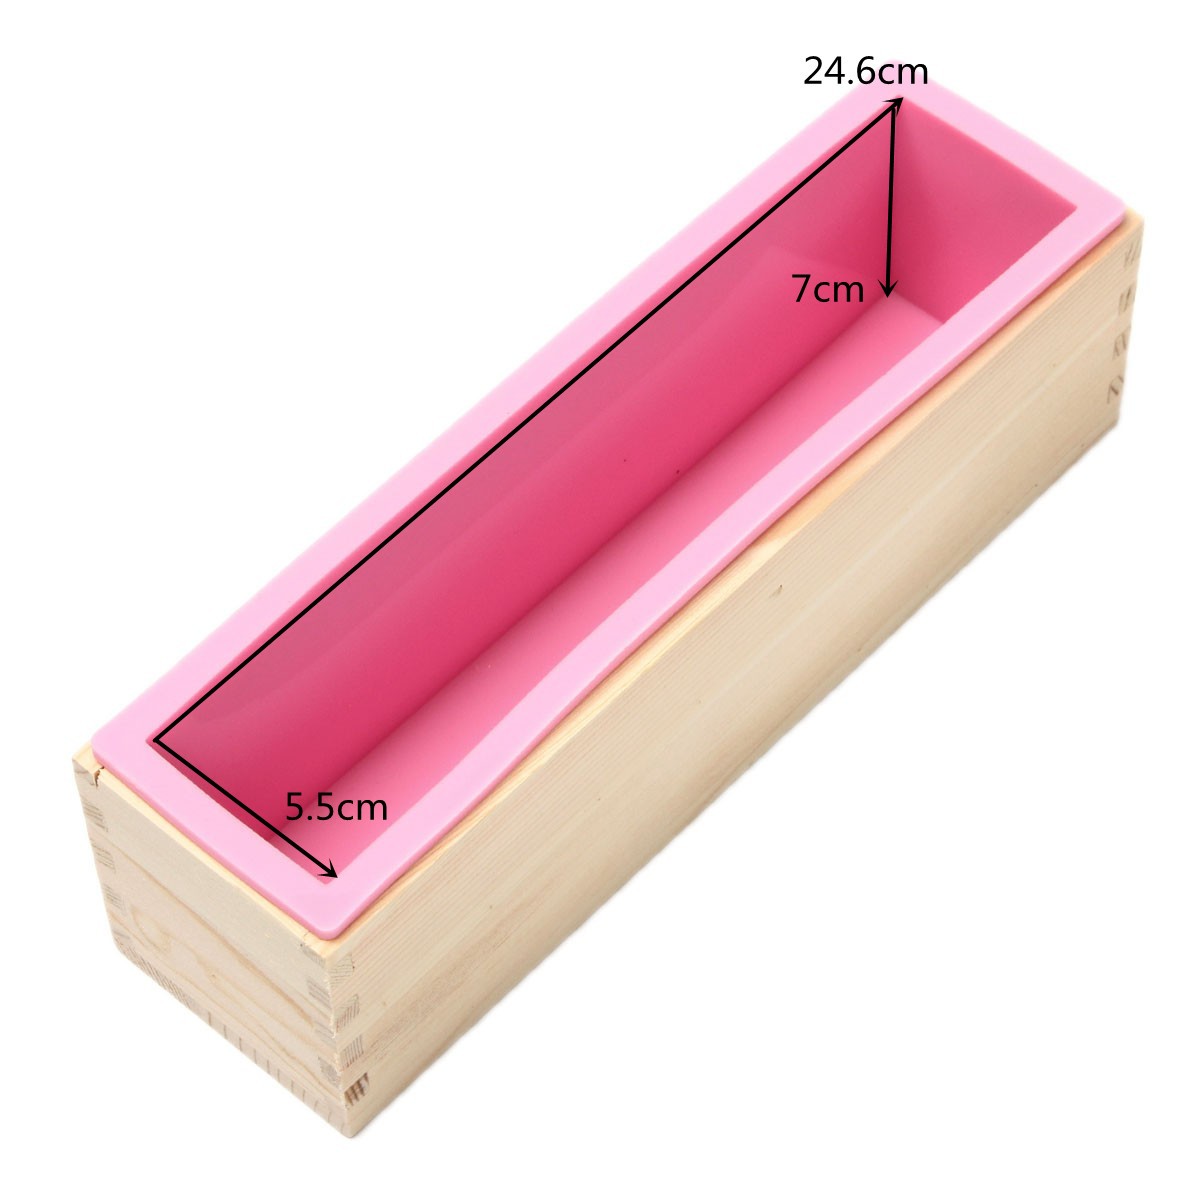 Silicone-Loaf-Bread-Cake-Mold-Soap-Making-Mould-Biscuit-Baking-Tool-with-Wooden-Box-1400541